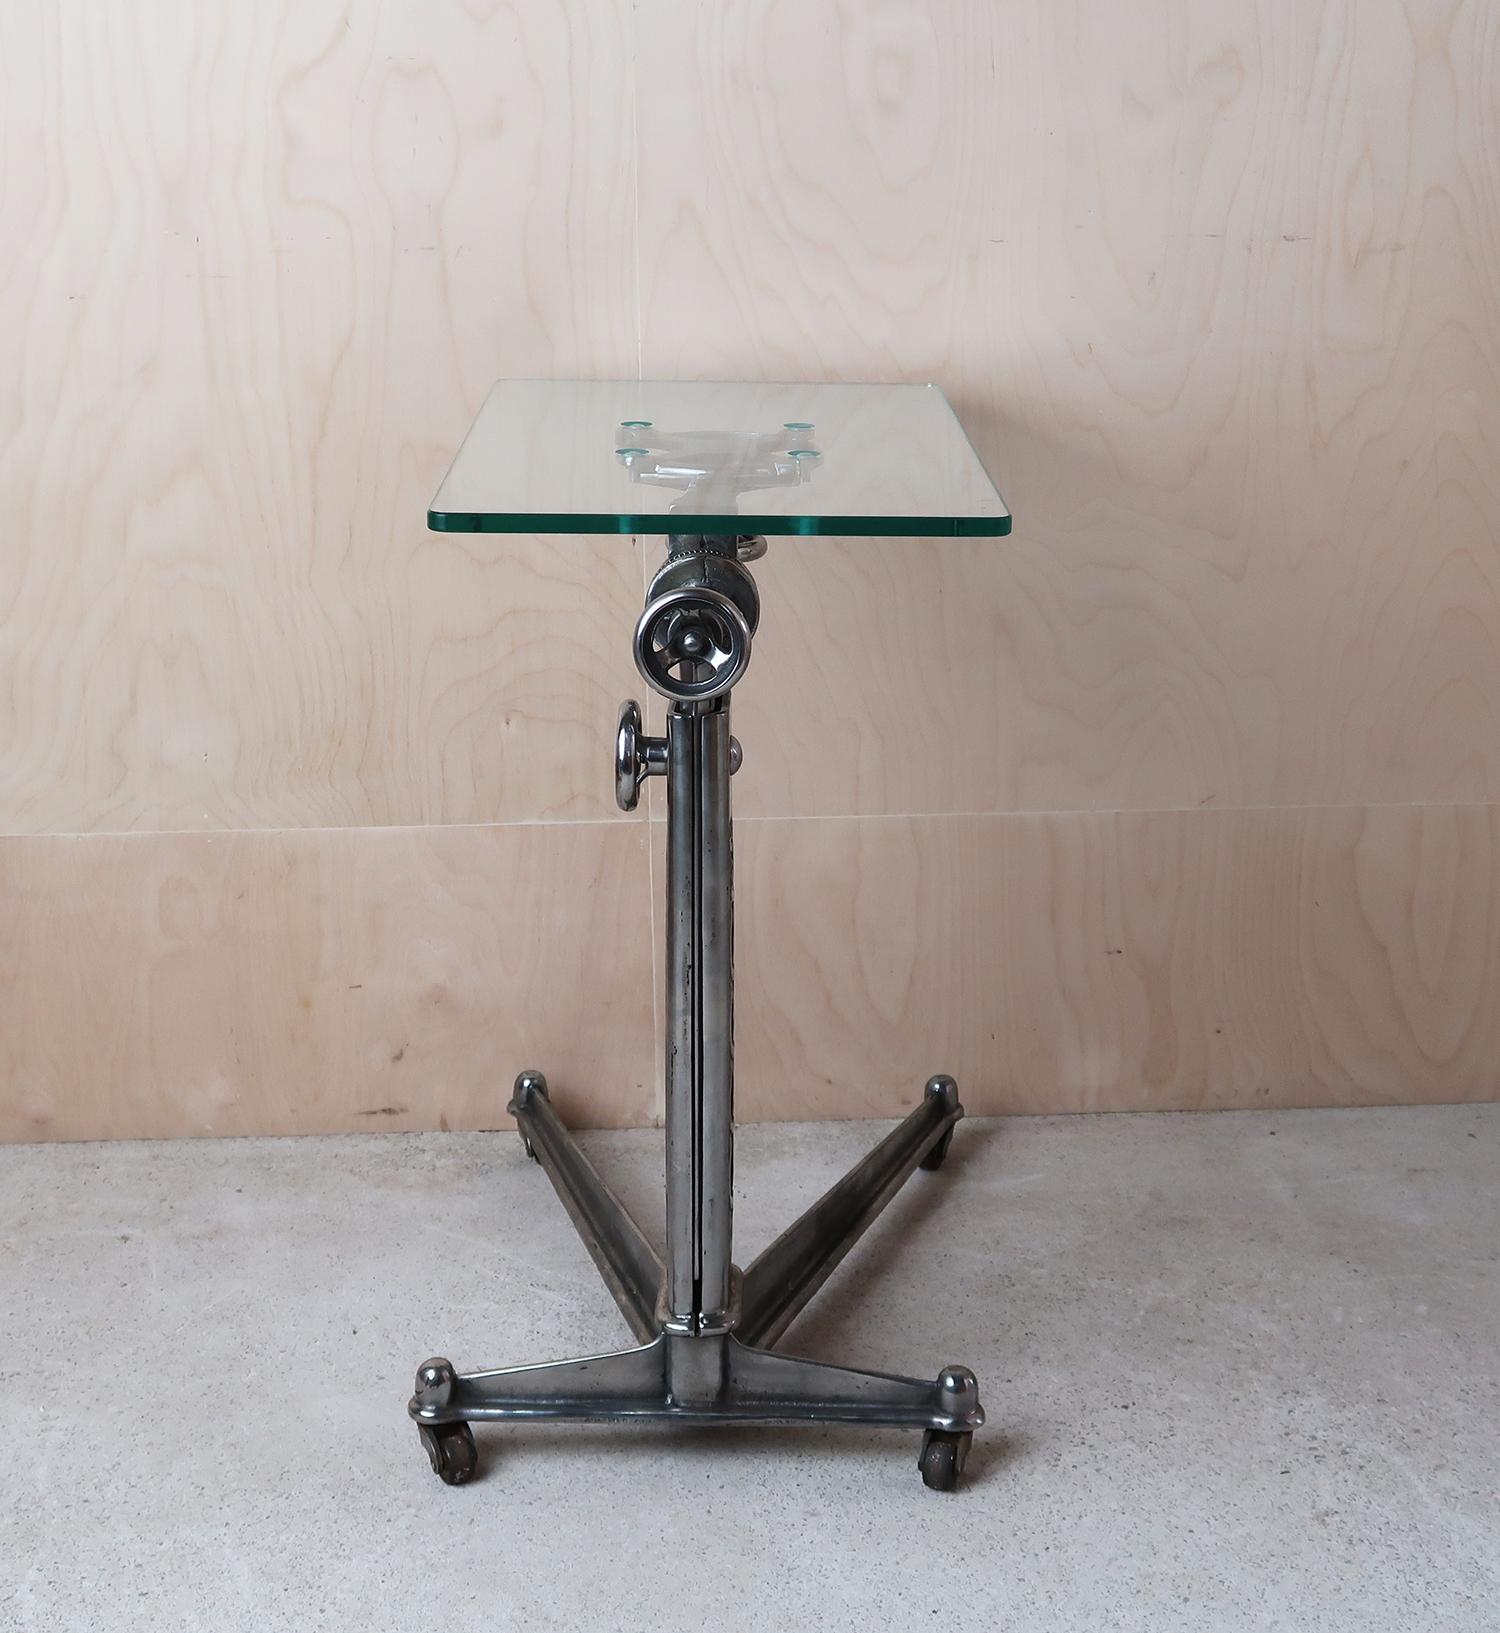 Vintage Industrial Adjustable High to Low Side Table, English, C.1900 For Sale 1